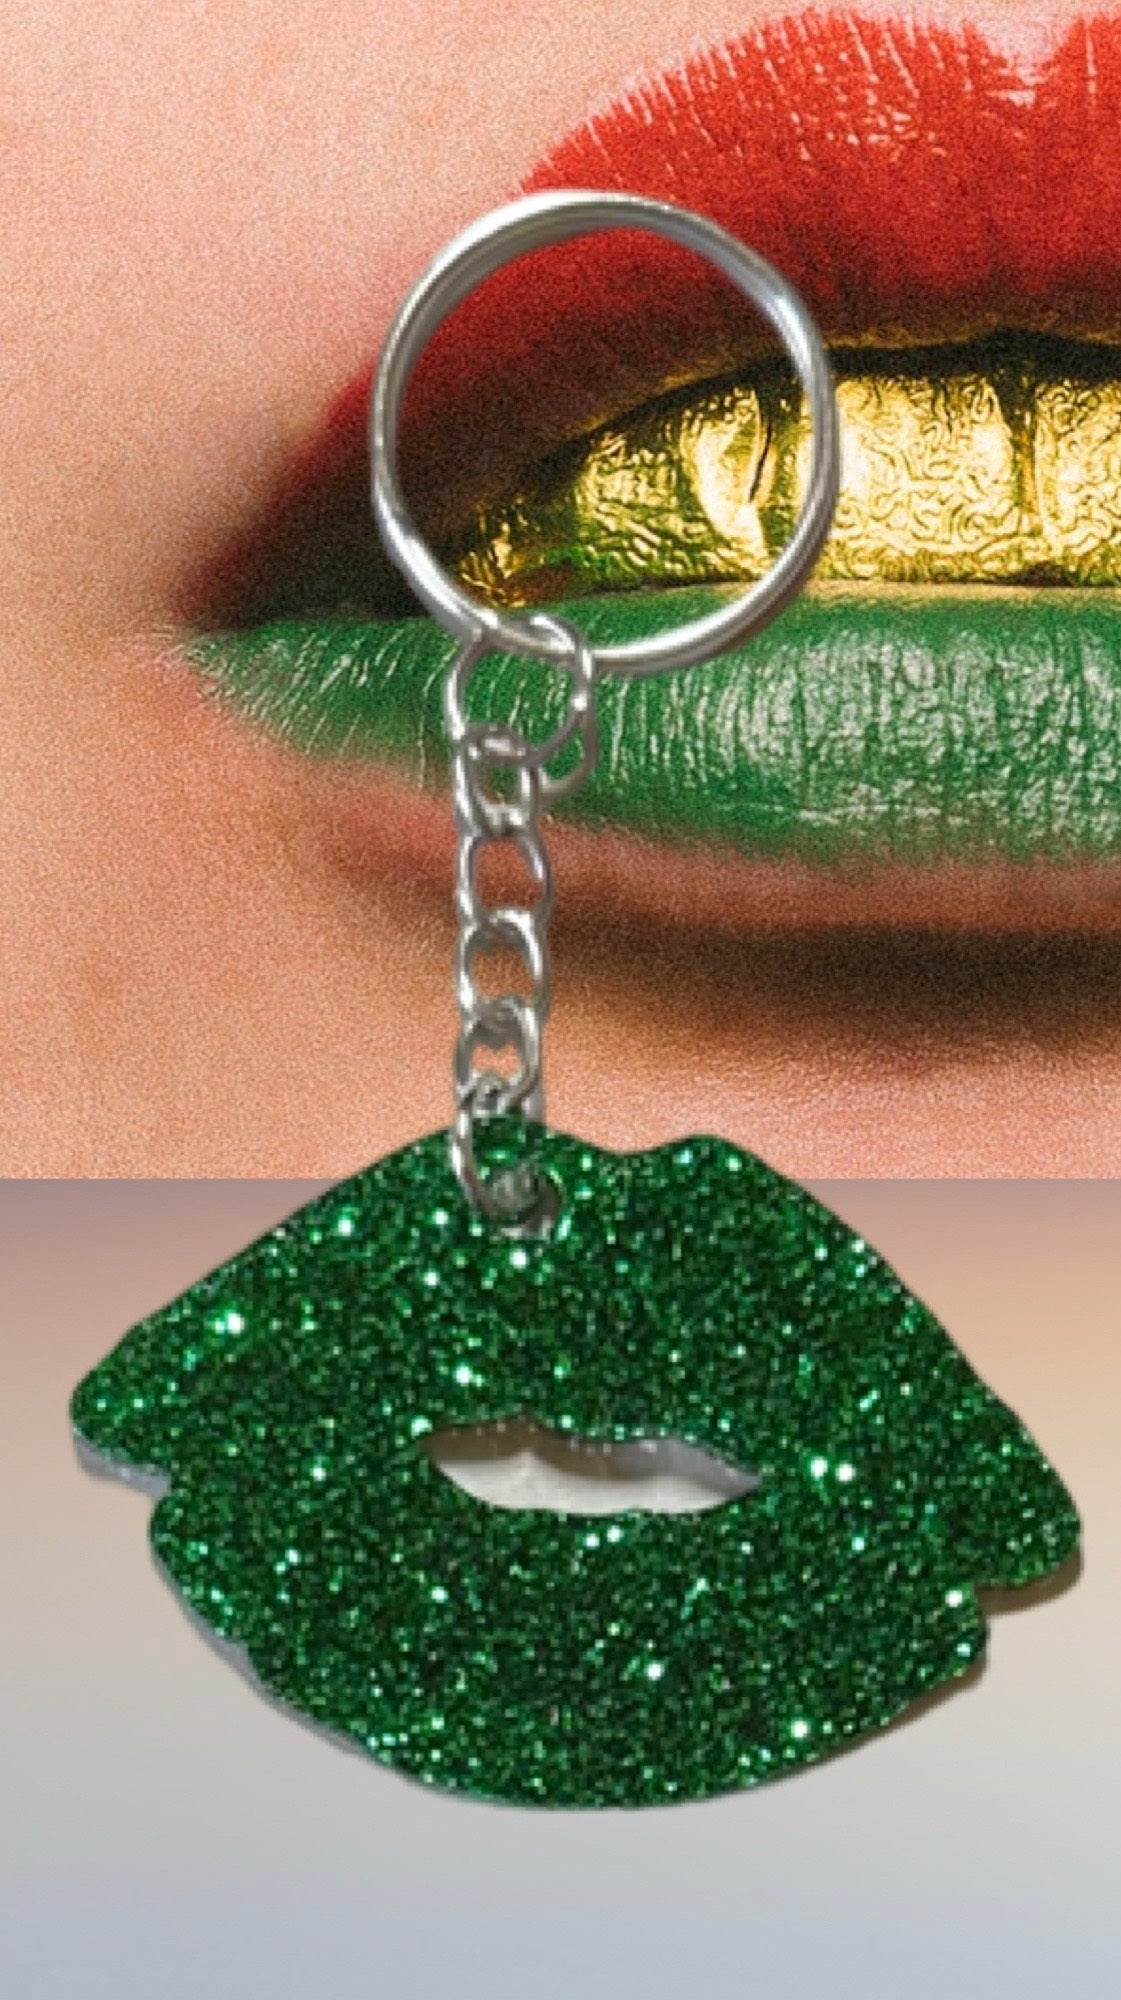 Glitter Lips Laser Cut Lightweight Acrylic Keychains- Multiple Colors